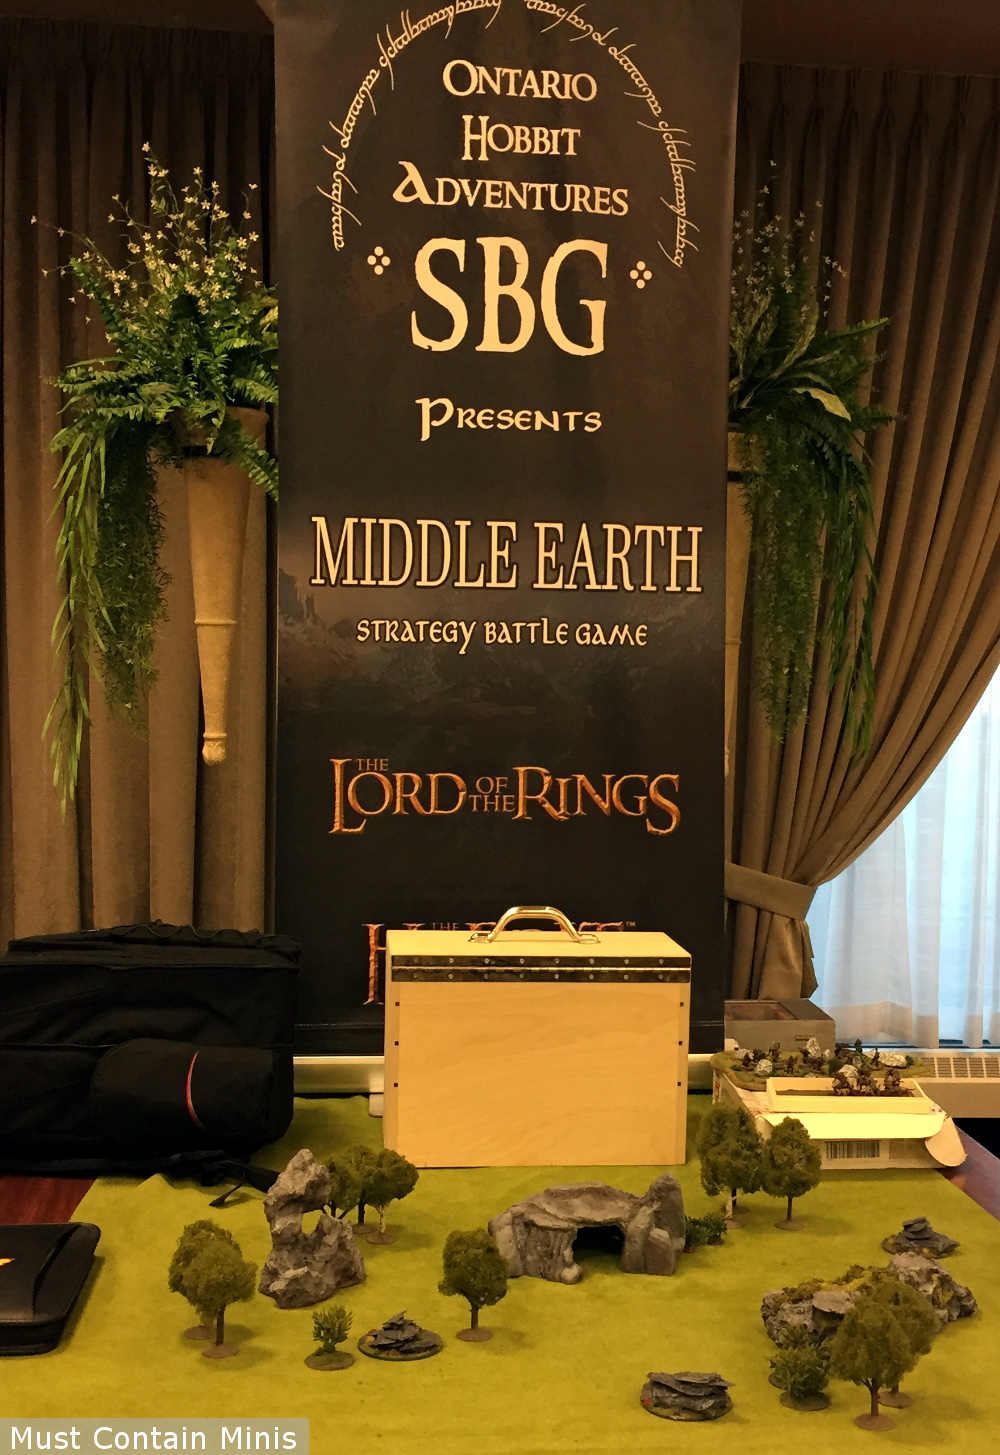 You are currently viewing Hobbit Battle Boards – Ontario Hobbit Adventures (at Hotlead 2018)